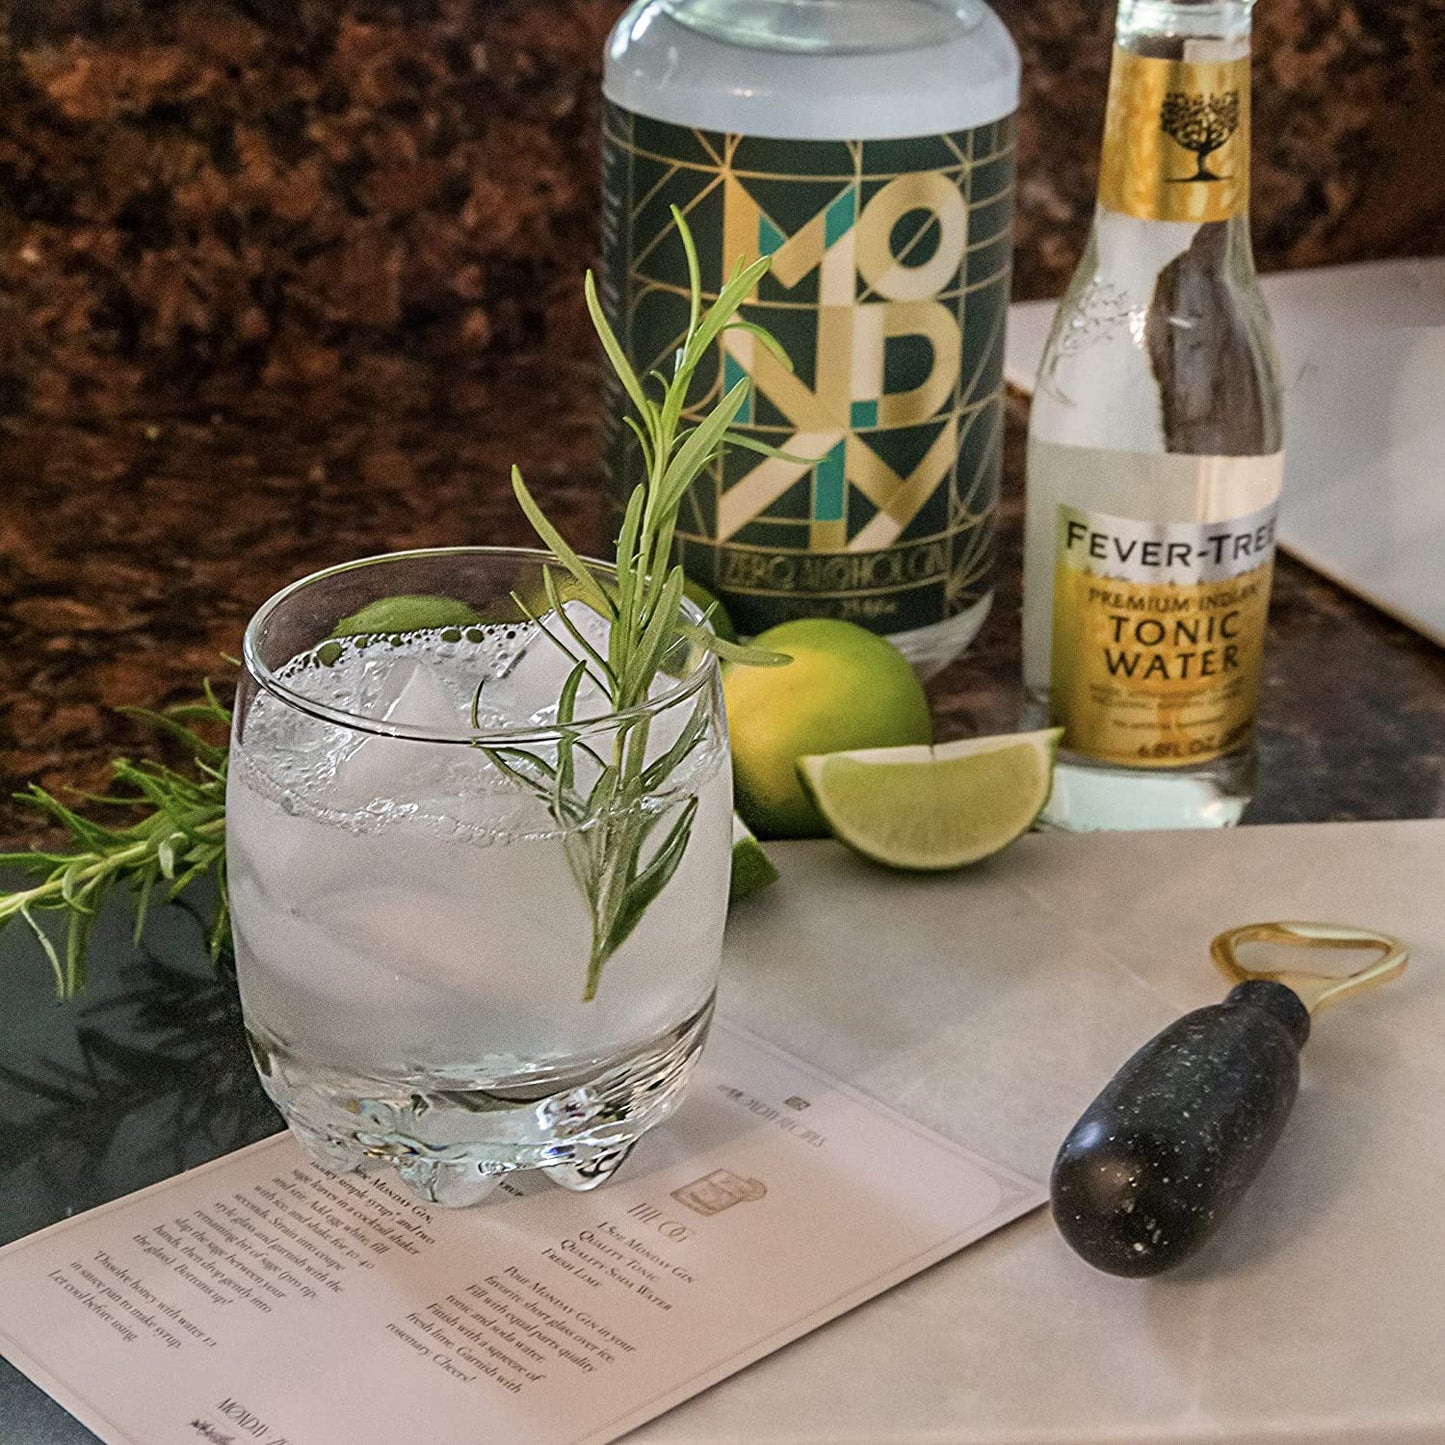 A refreshing looking cocktail with ice. There is a bottle of non-alcoholic Monday gin in the background along with a bottle of tonic water.